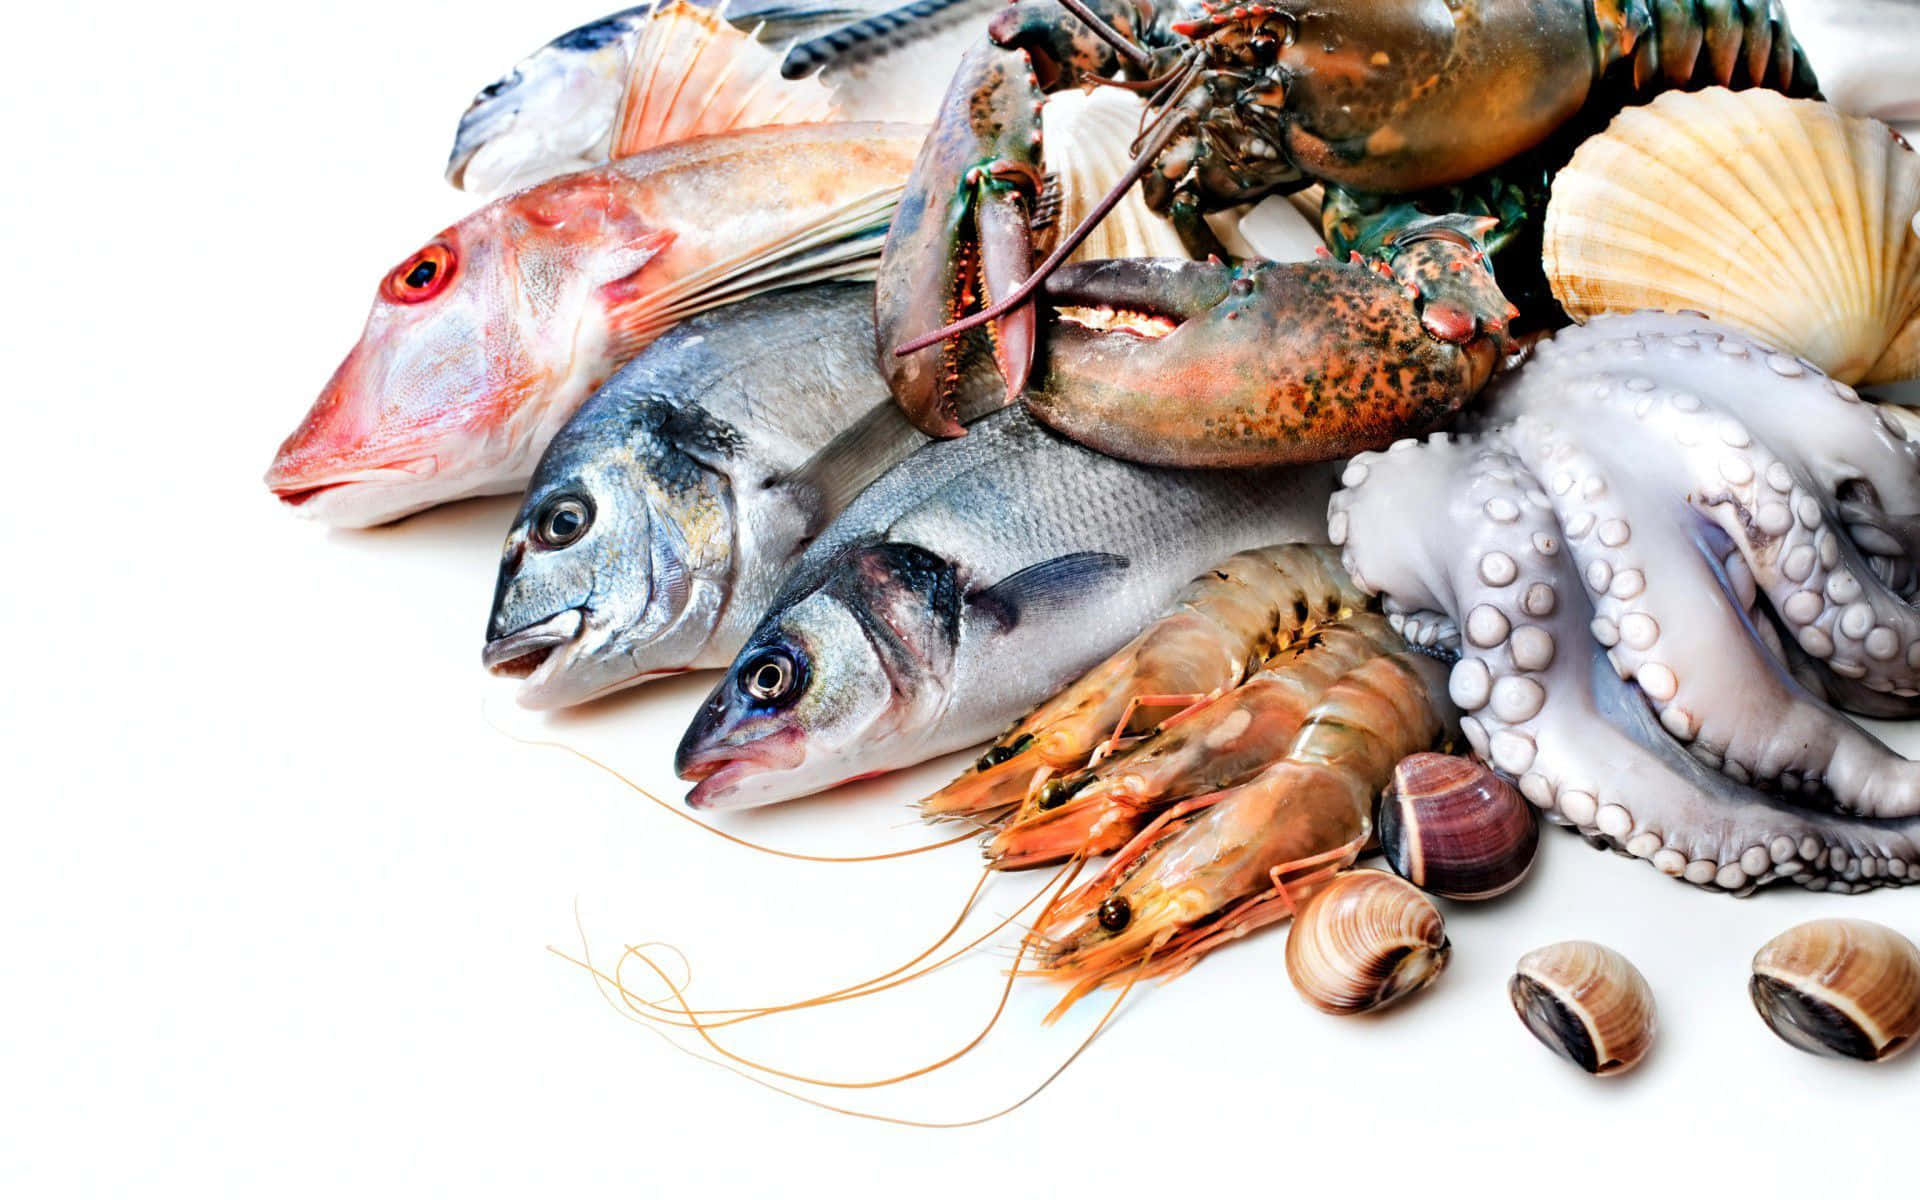 An array of delicious Seafood items